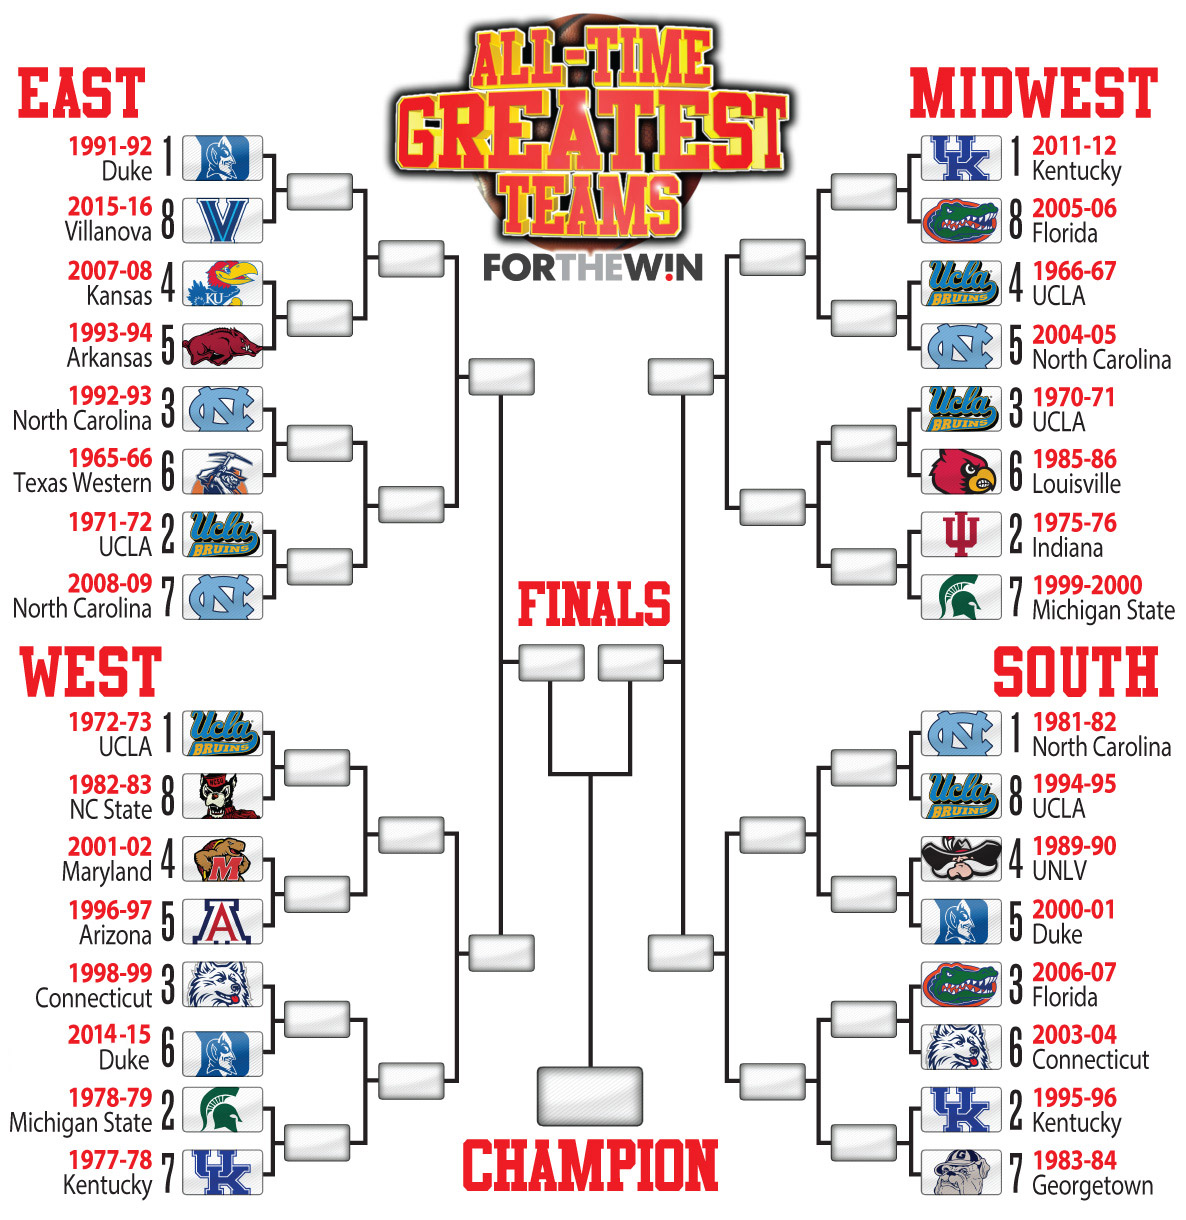 Bracket Madness Help us pick the greatest NCAA tournament team of all